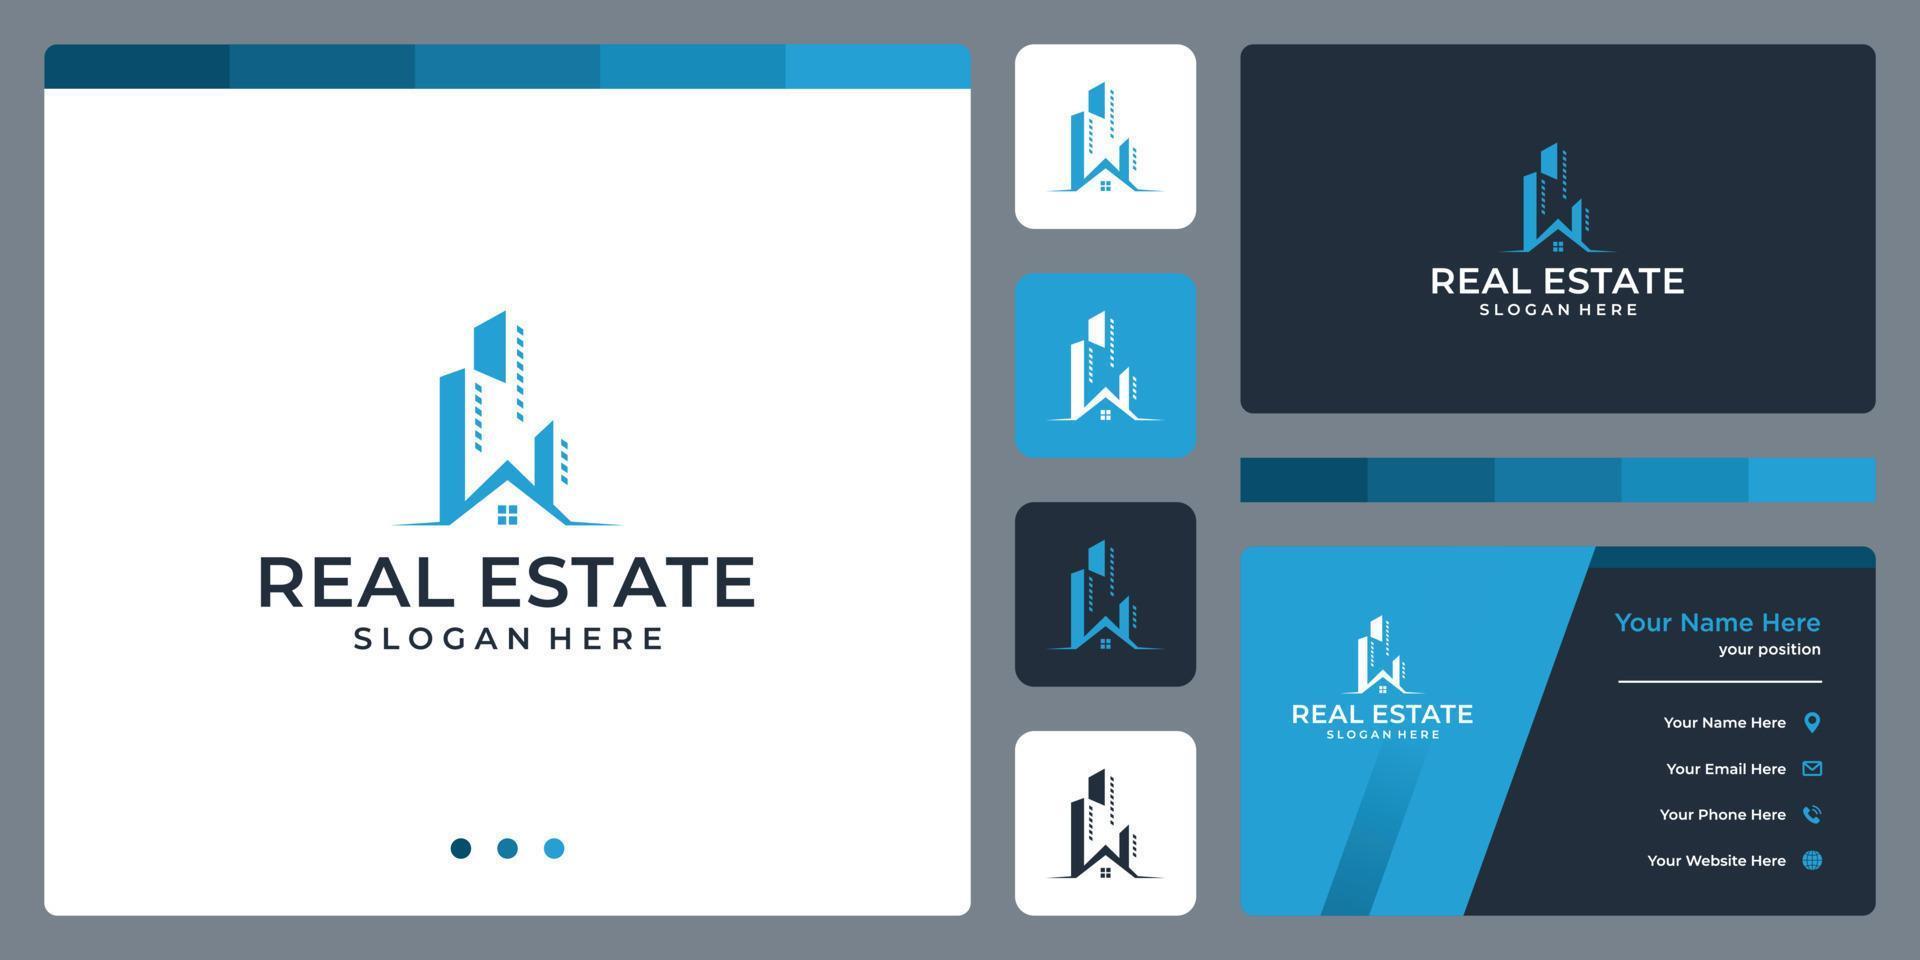 architectural building logo with real estate logo design template. vector